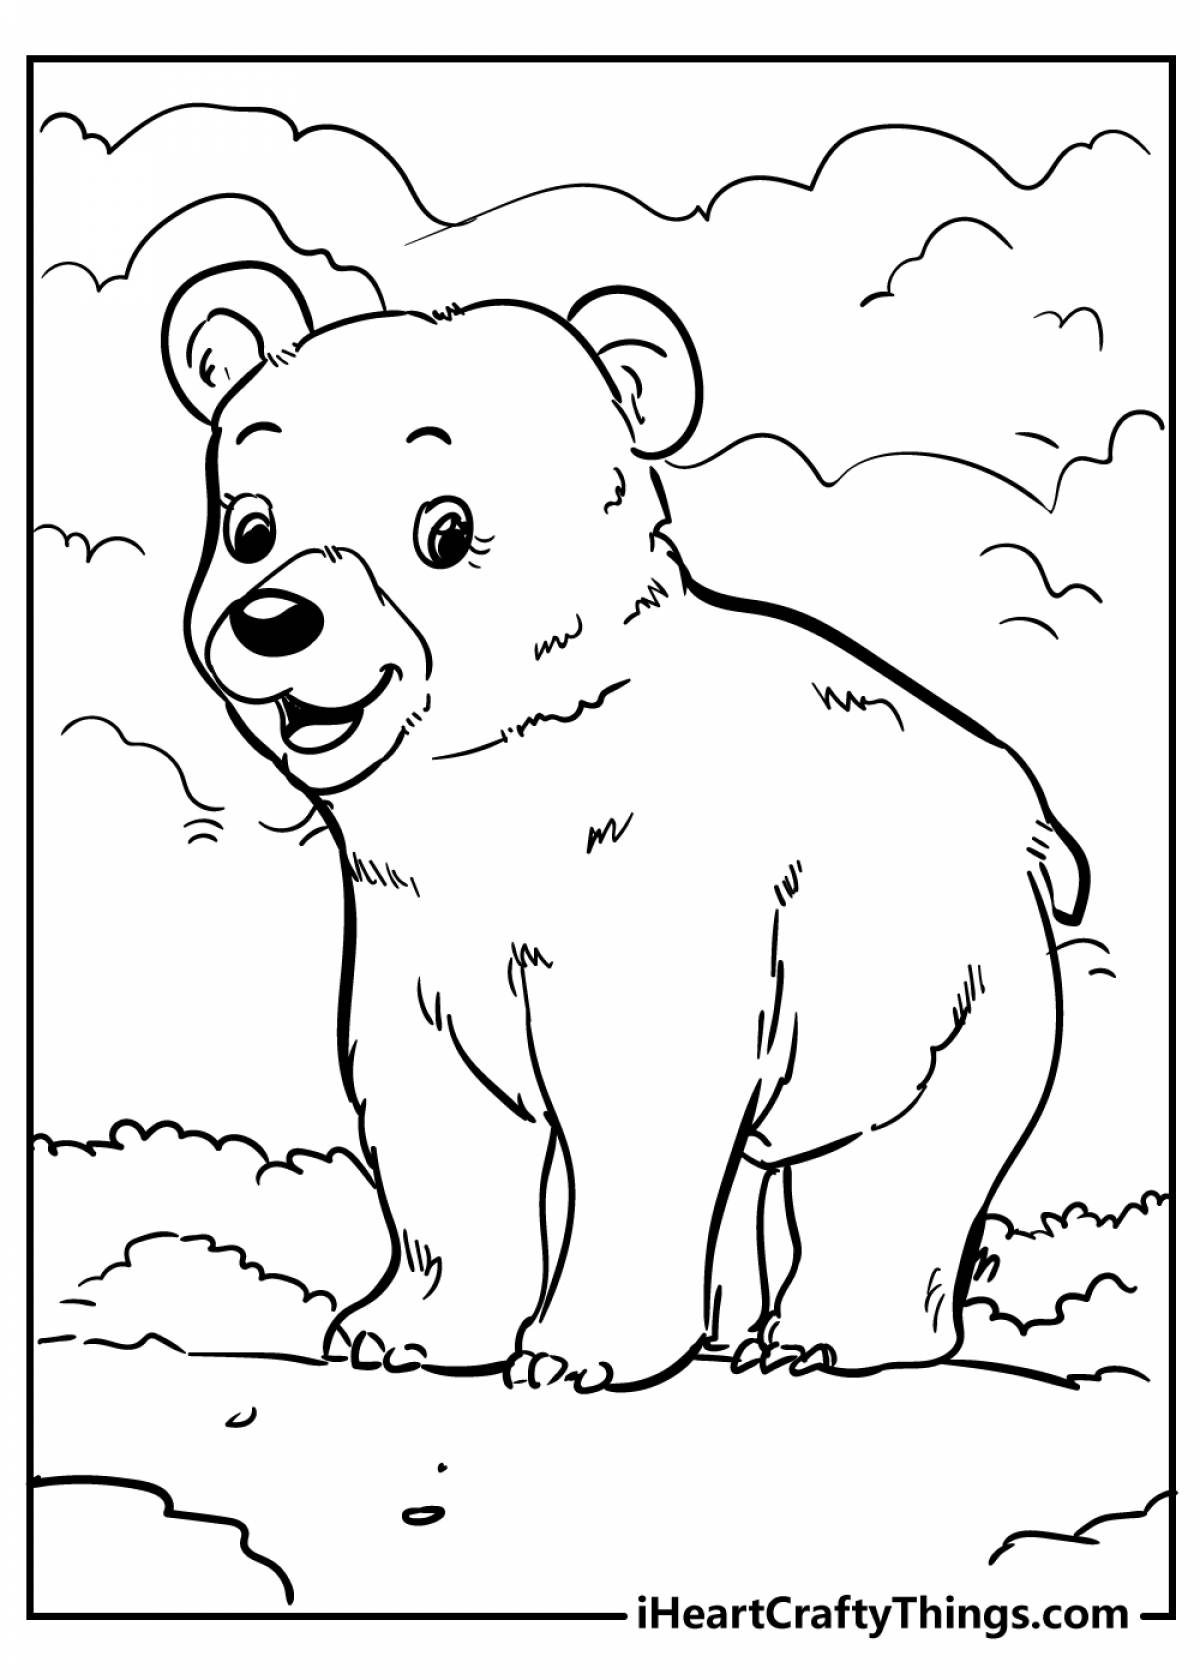 Crazy Bear coloring book for 4-5 year olds